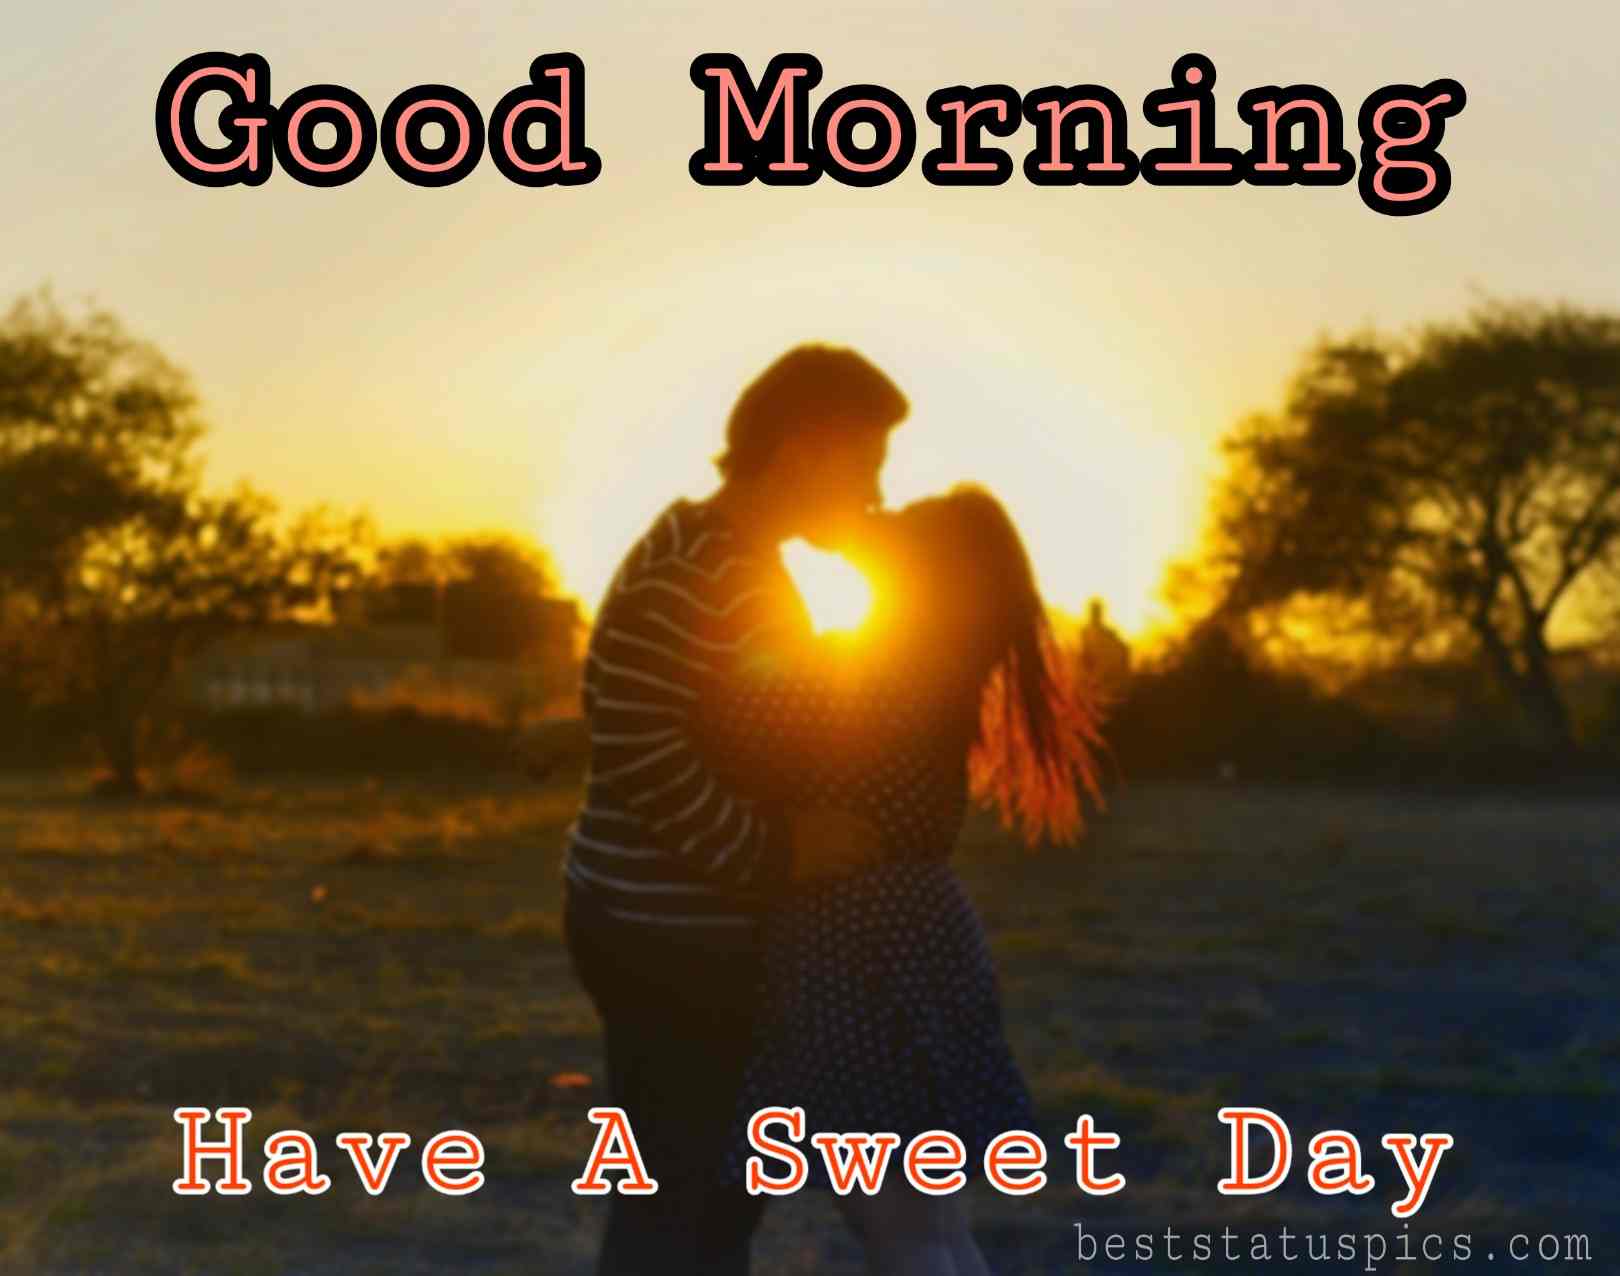 Good morning romantic couple kiss images with Have a sweet day quote for Whatsapp status